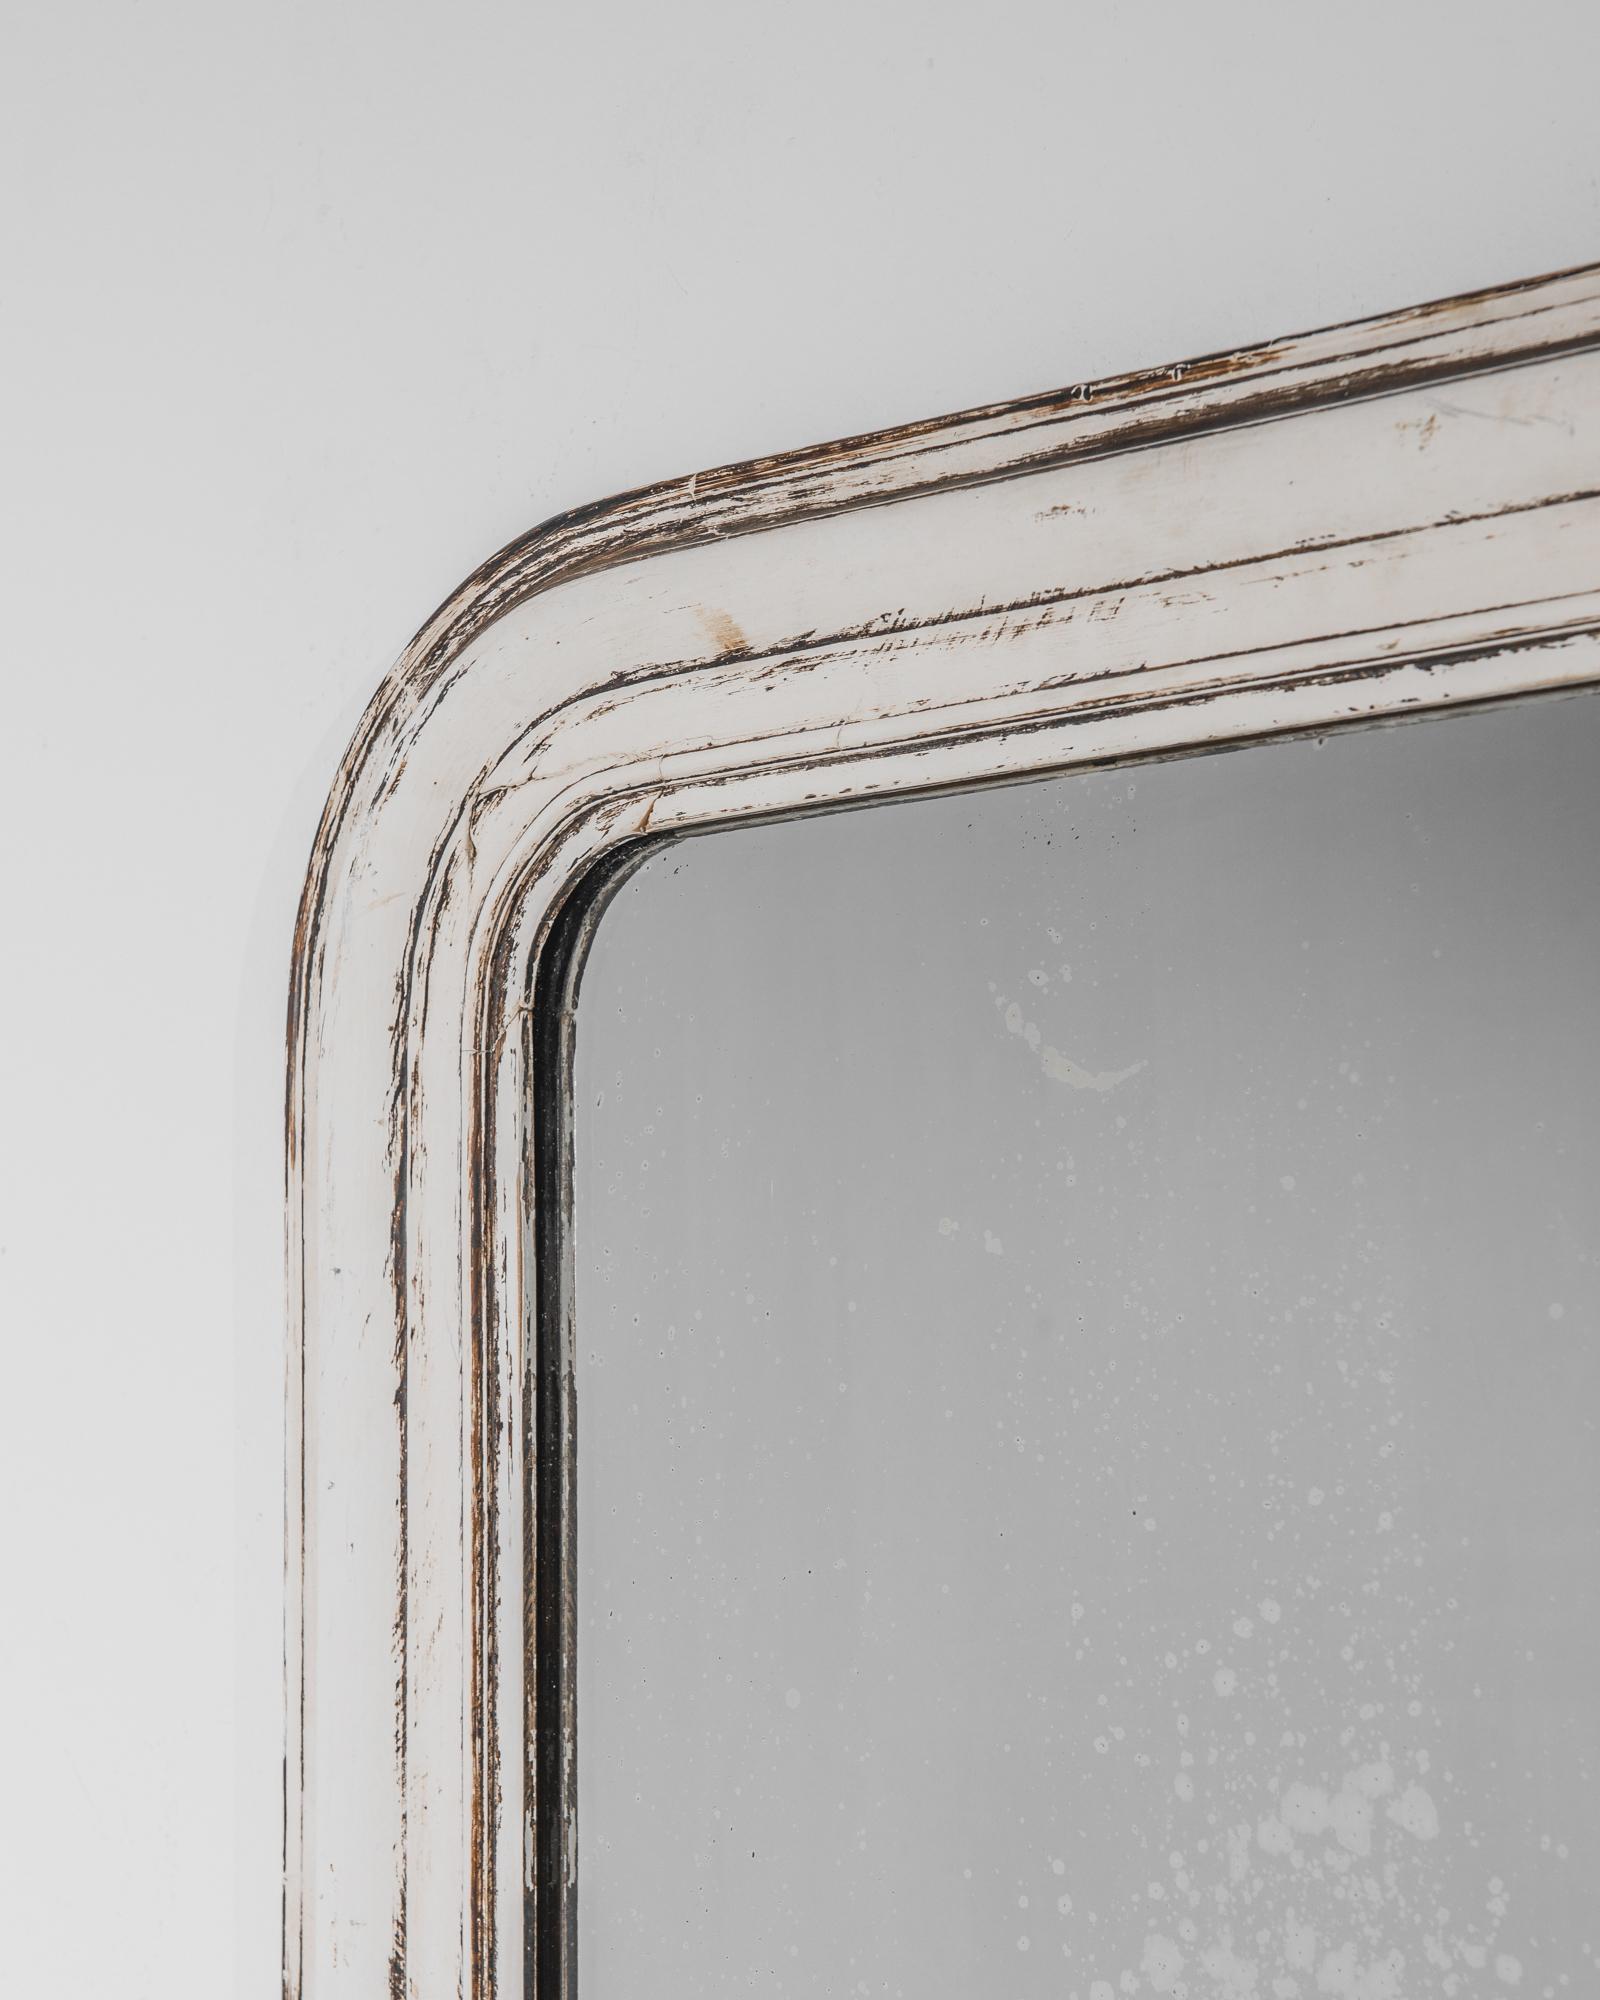 A wooden mirror from 1880s France. The curved upper corners of the frame create a softly rounded profile, harmonizing with the pale dove grey of the paint. A subtle patina reveals the dark tone of the natural wood. Graceful lines and a calming color